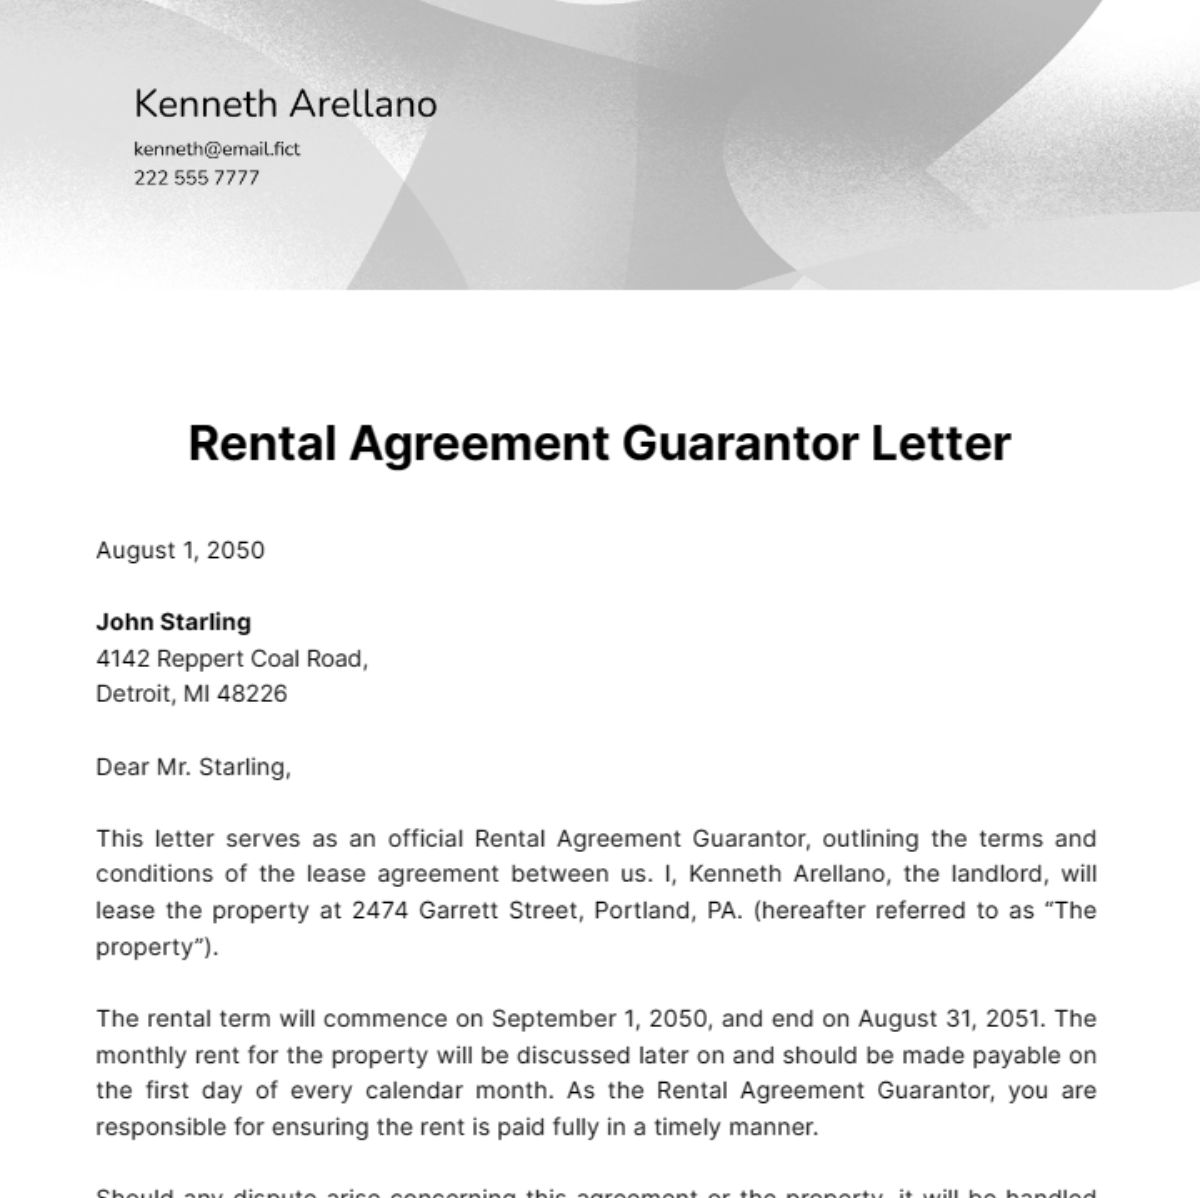 Free Rental Agreement Guarantor Letter Template